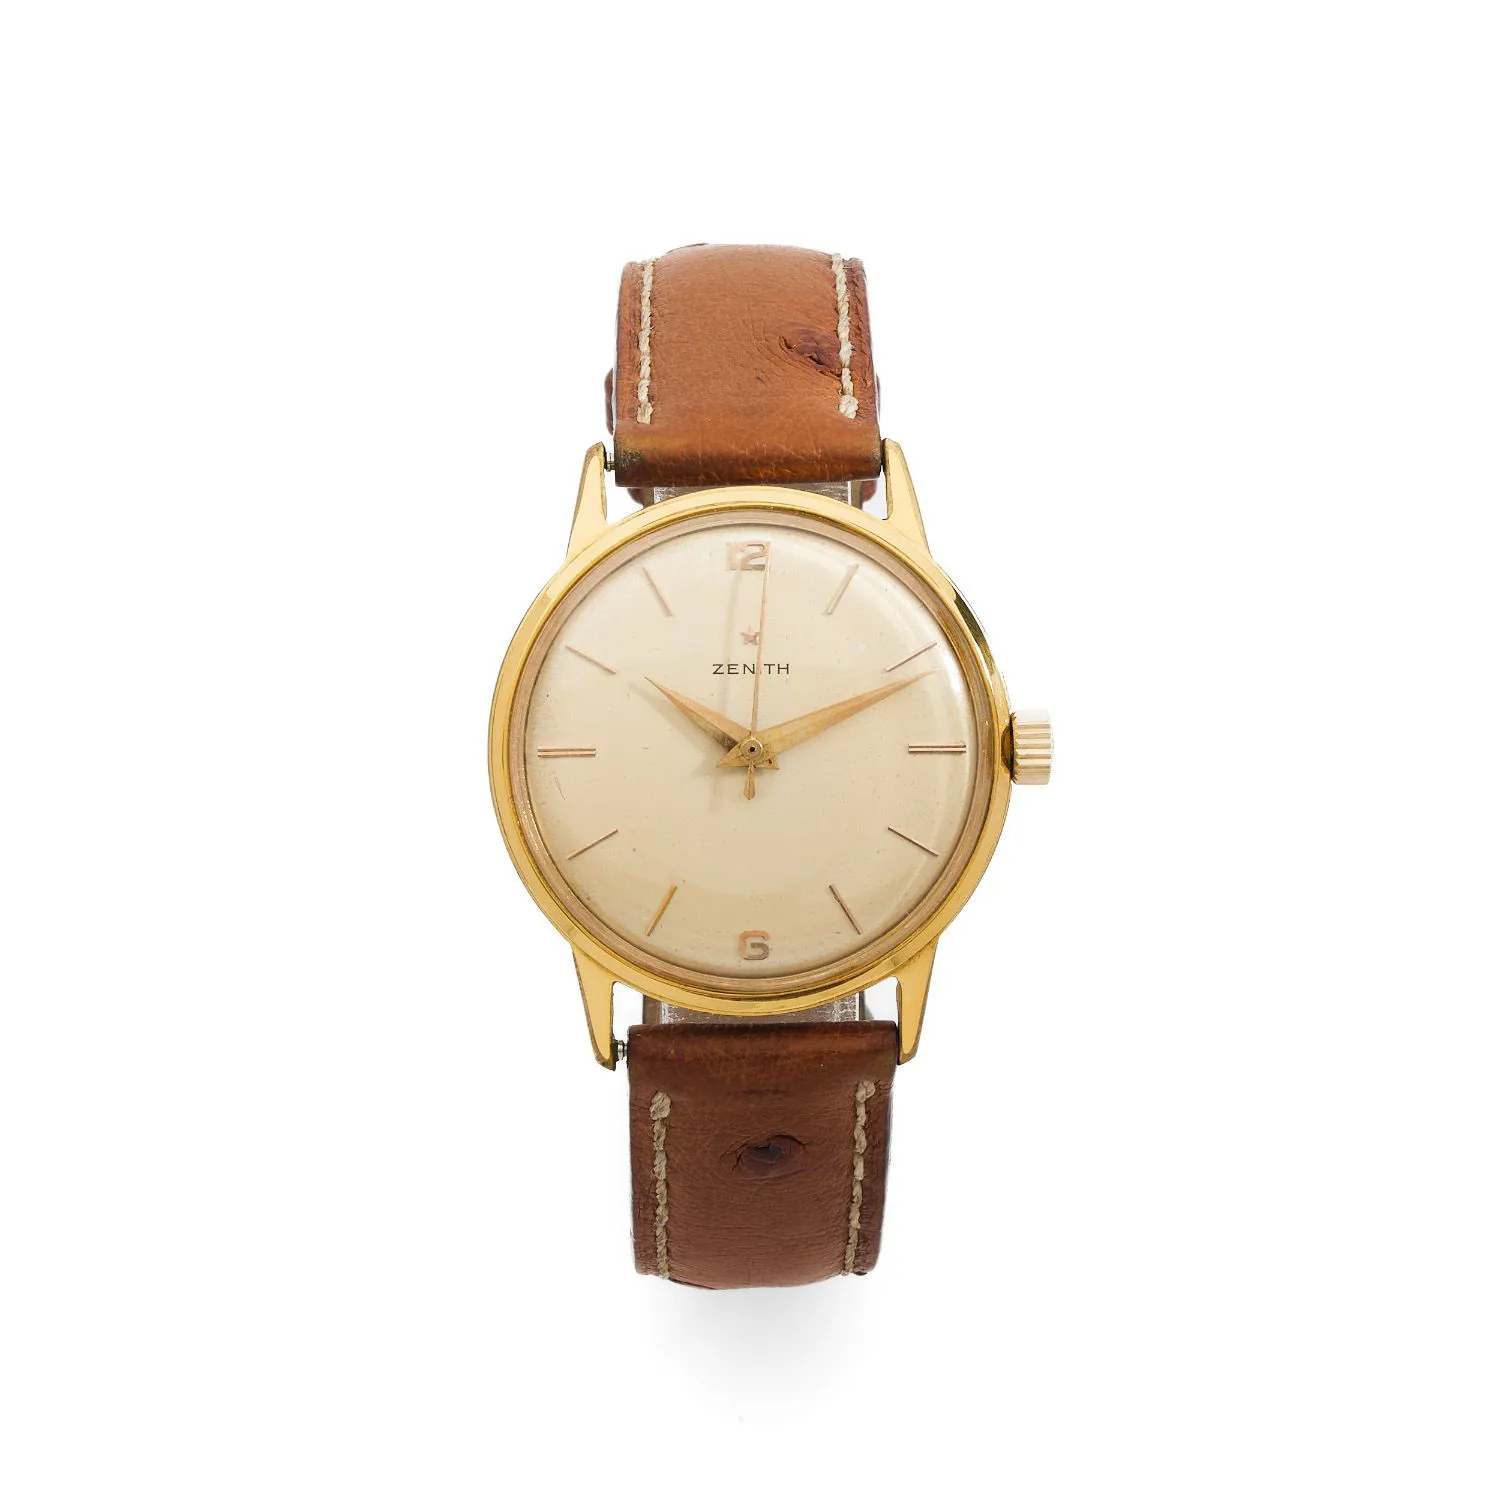 Zenith 34mm Gilt Metal and stainless steel Cream